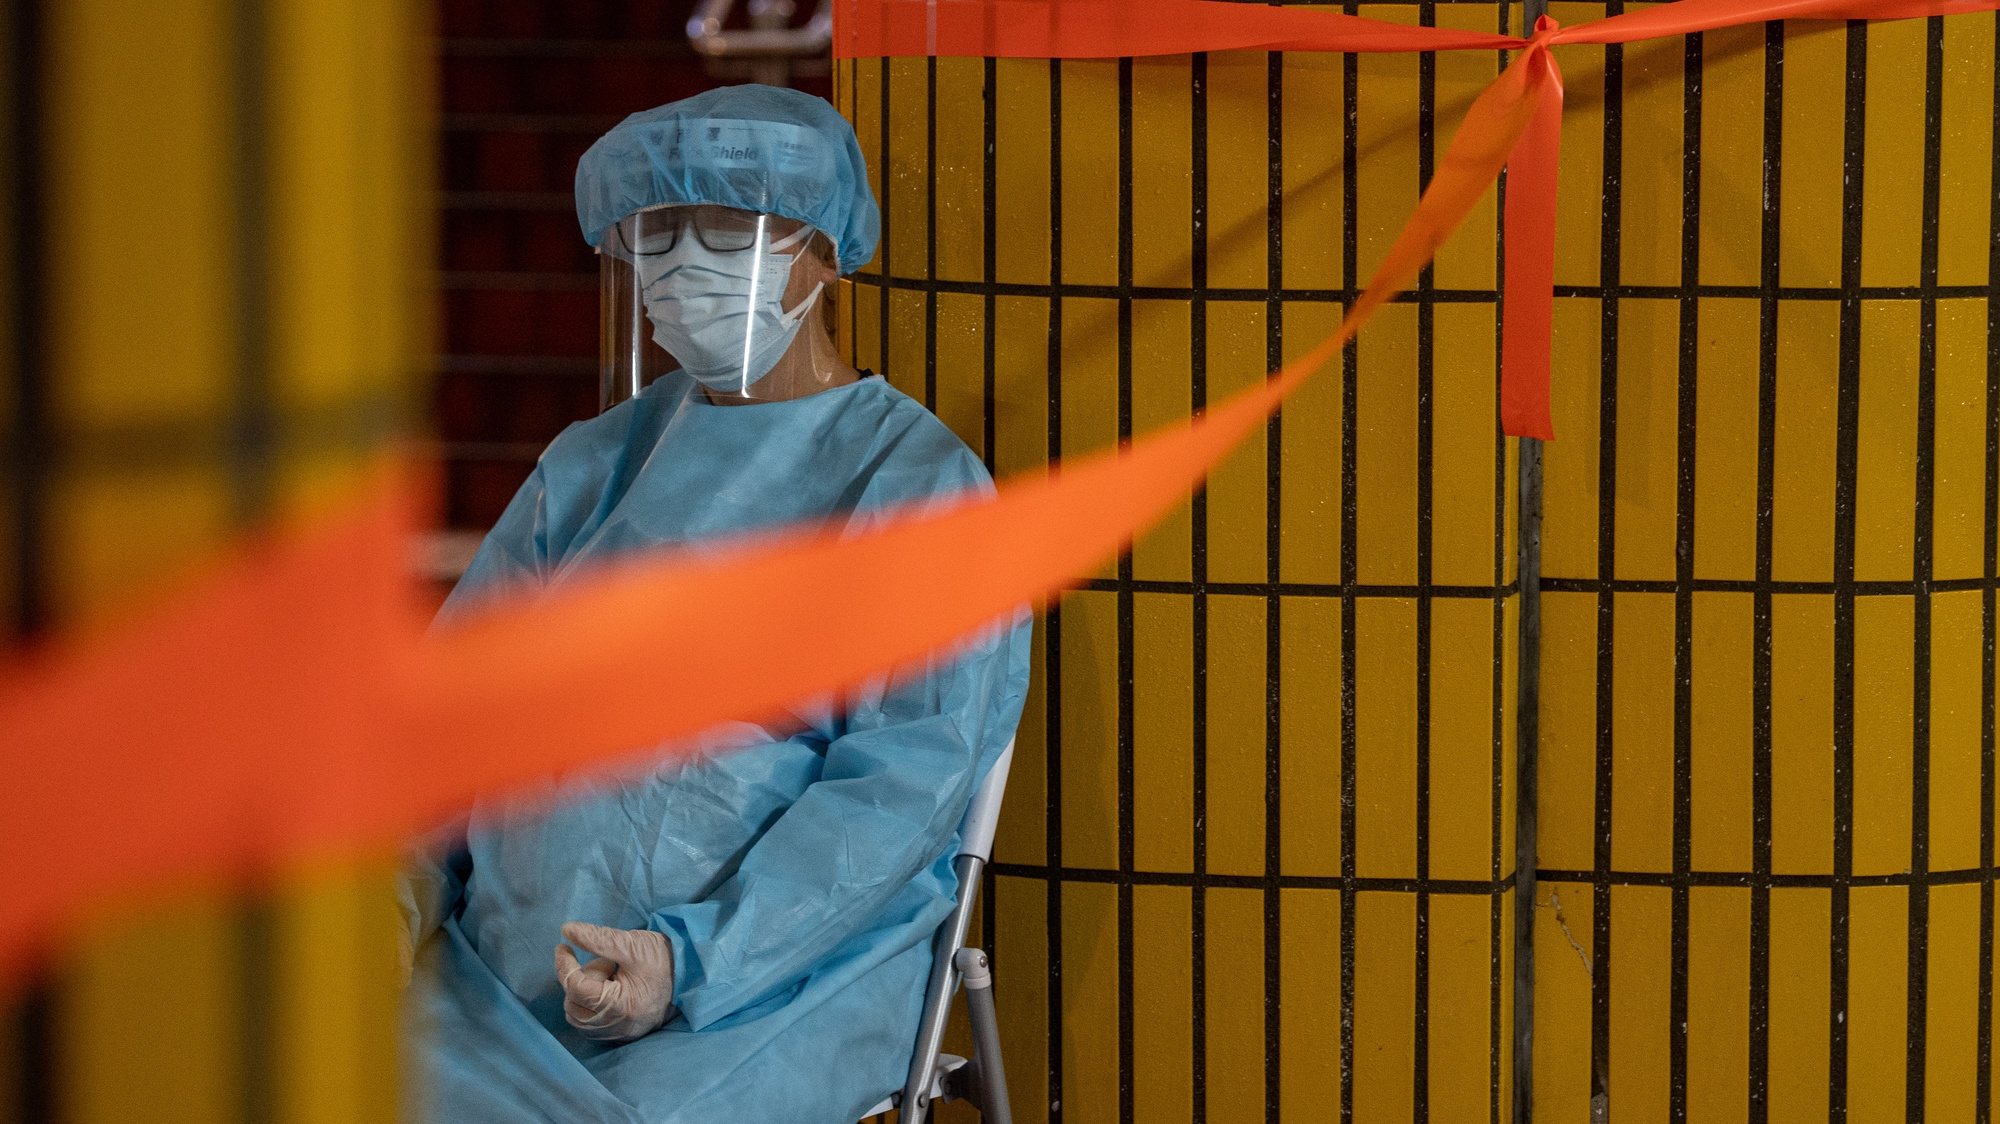 epa09848626 A health worker sits outside of a building under lockdown in Hong Kong, China, 25 March 2022. Starting from April 2022, the government will distribute kits with rapid COVID-19 tests, KN95 masks to 3 million households.  EPA/JEROME FAVRE